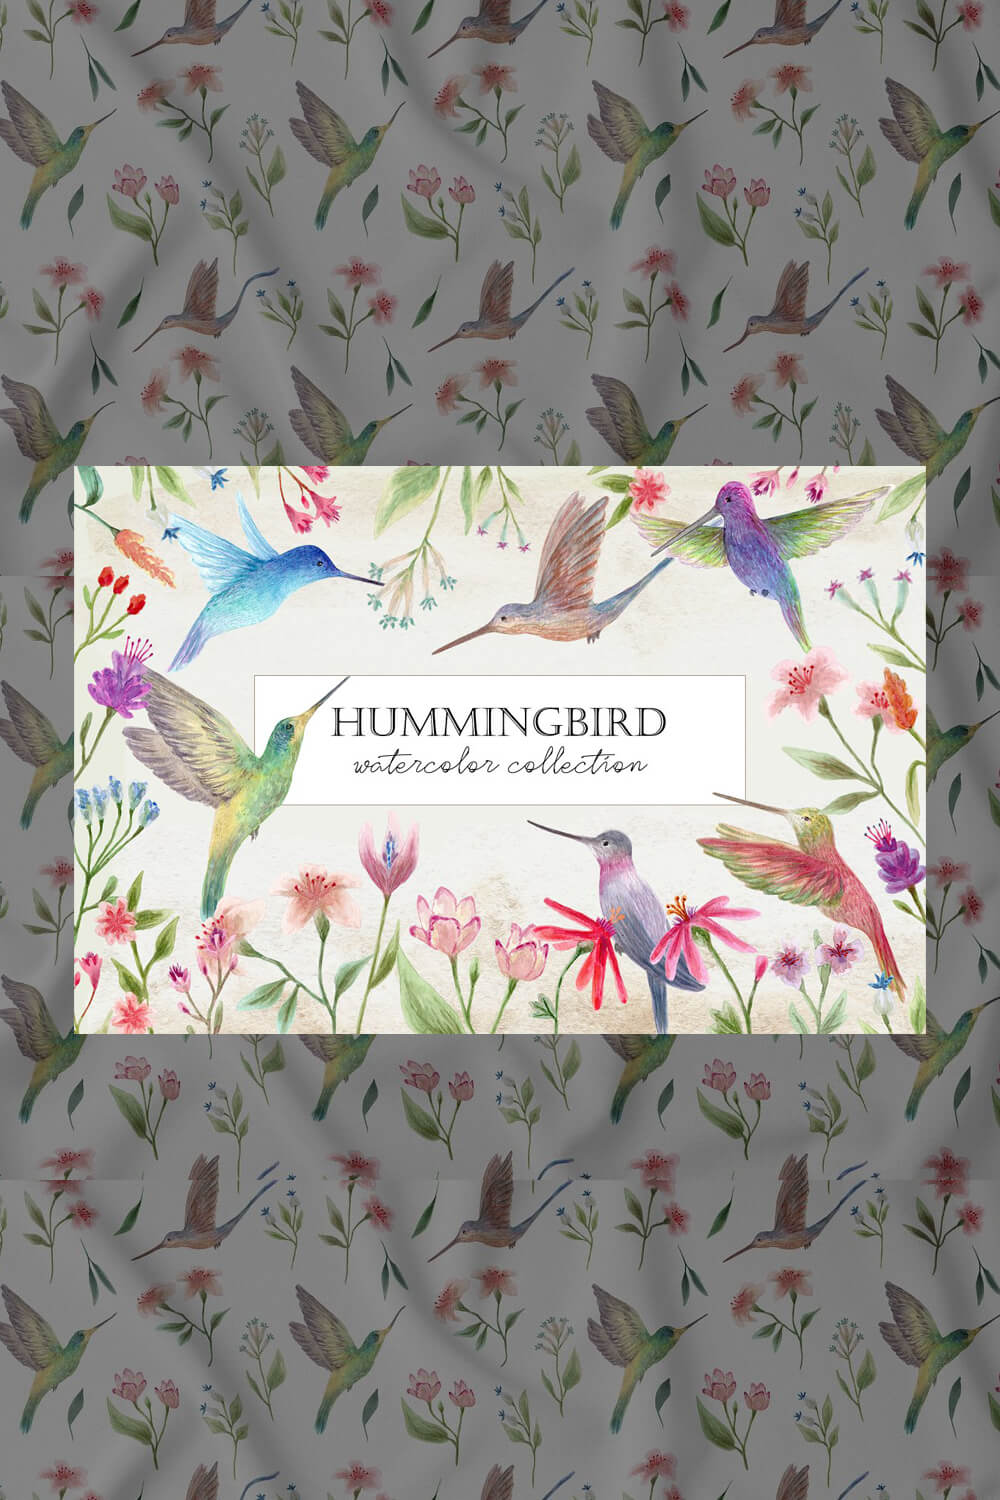 In the center are more brightly painted hummingbirds with flowers.